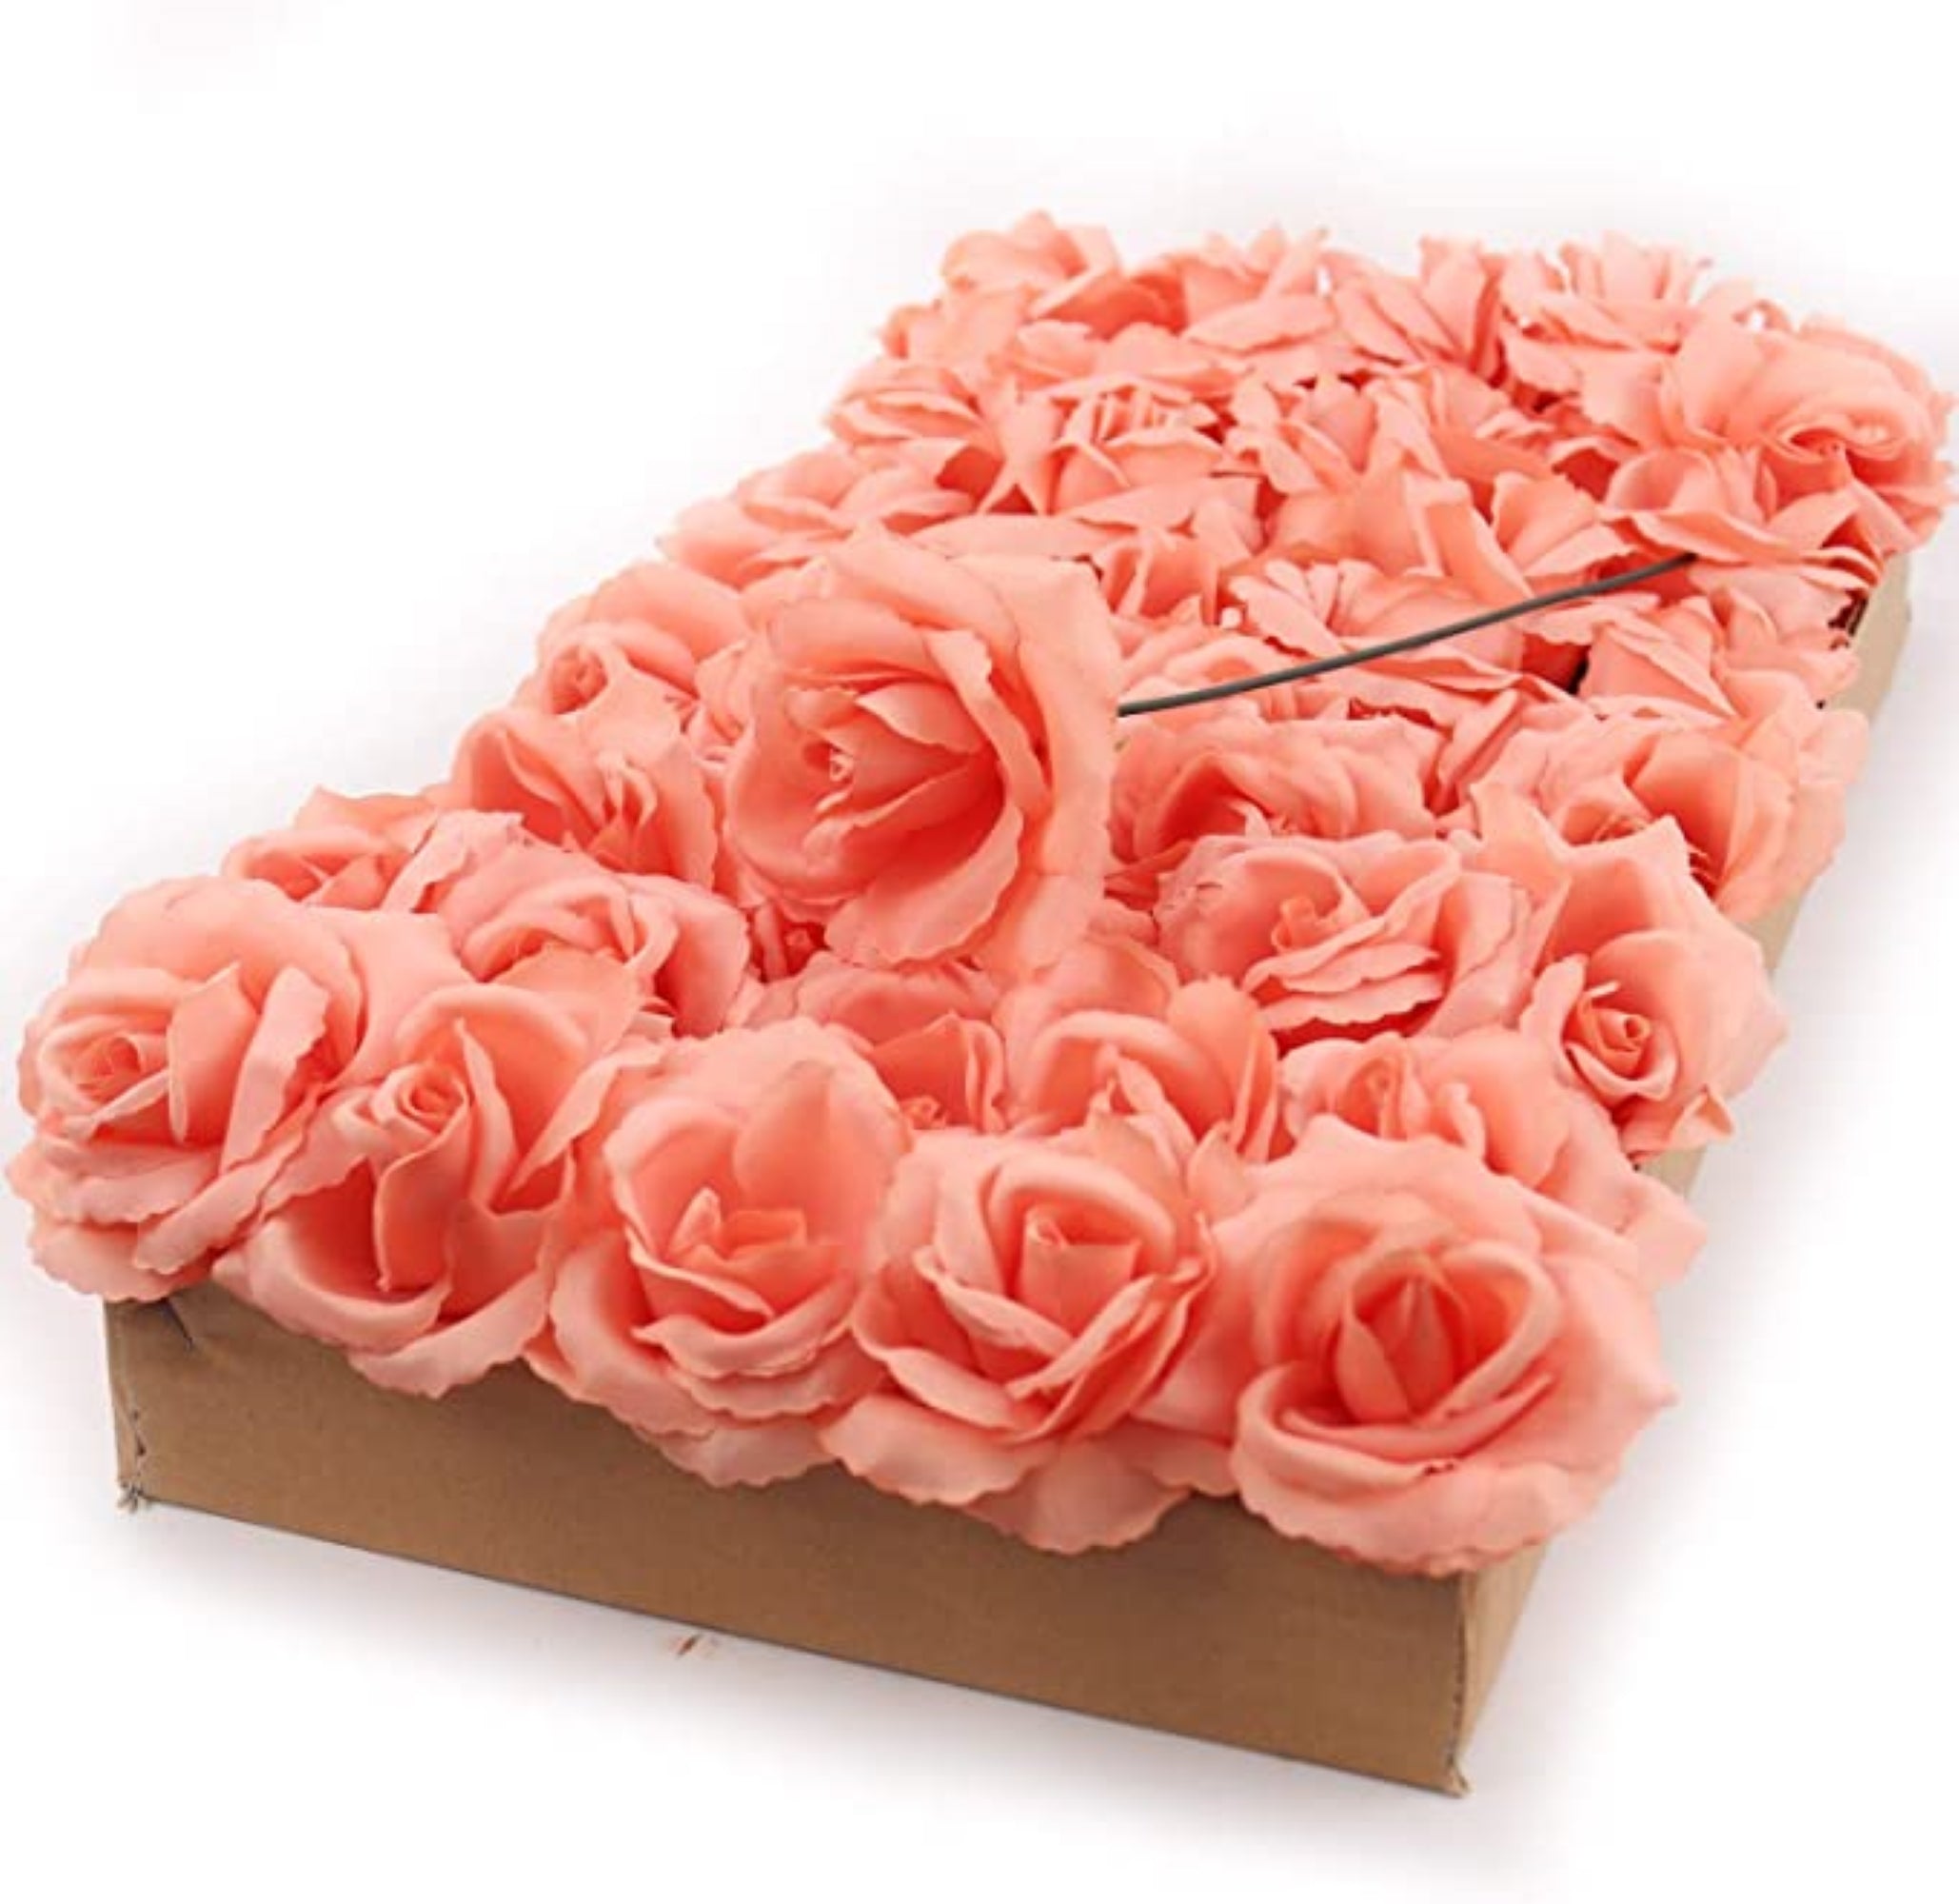 Graceful Beauty: 100pc Silk Flowers Peach Rose Picks - Captivating Artificial Floral Decor for Weddings, Crafts, and Home Styling - Premium Quality, Lifelike Design